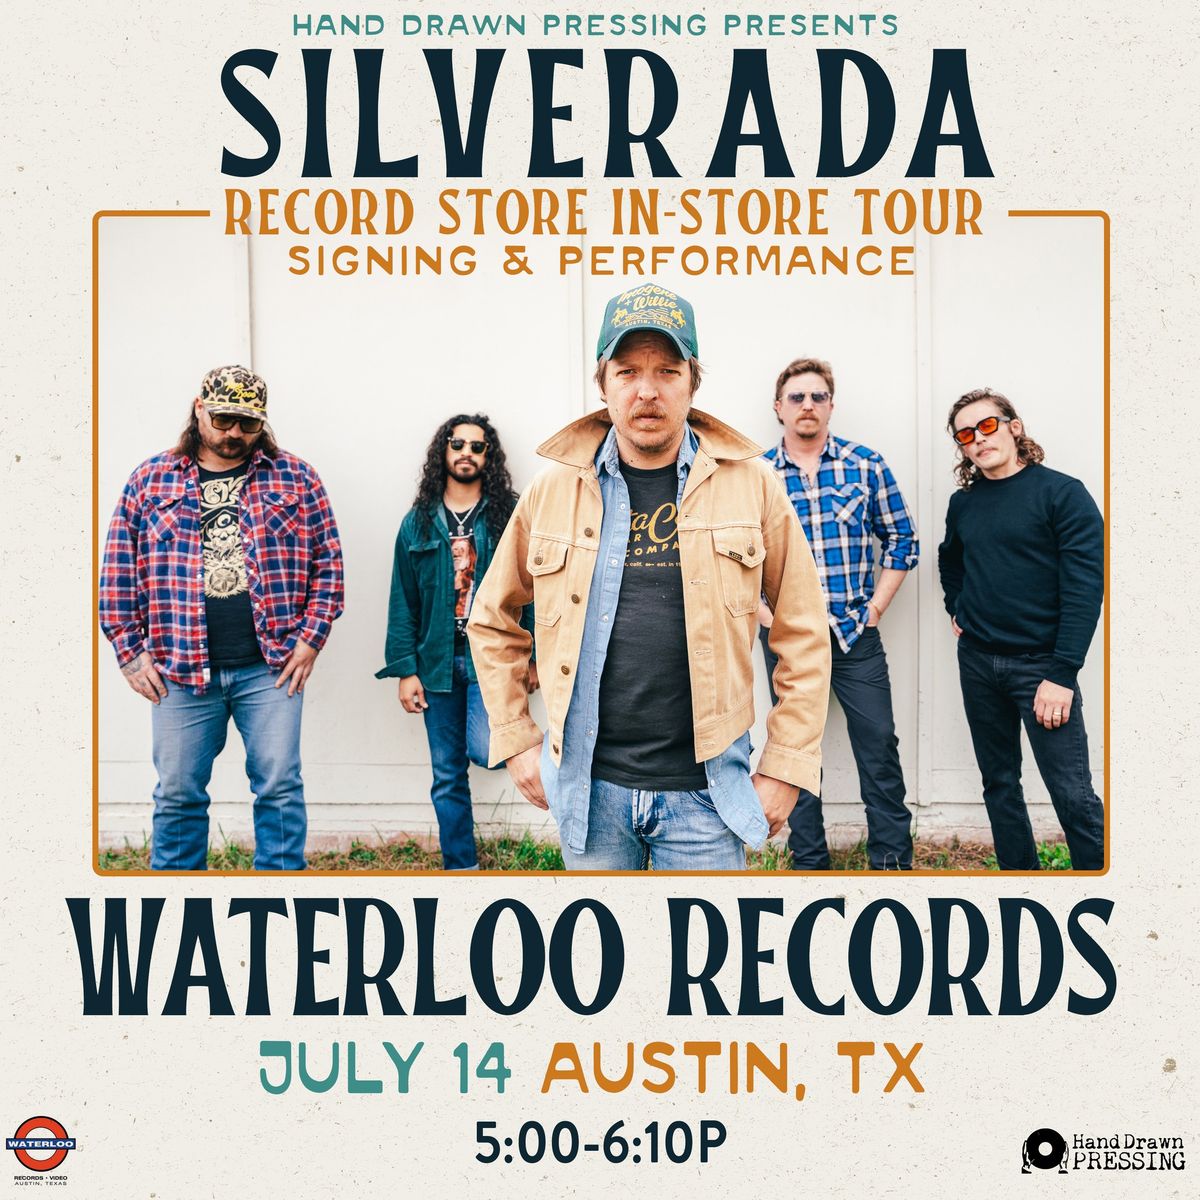 SILVERADA In-Store Performance & Record Signing